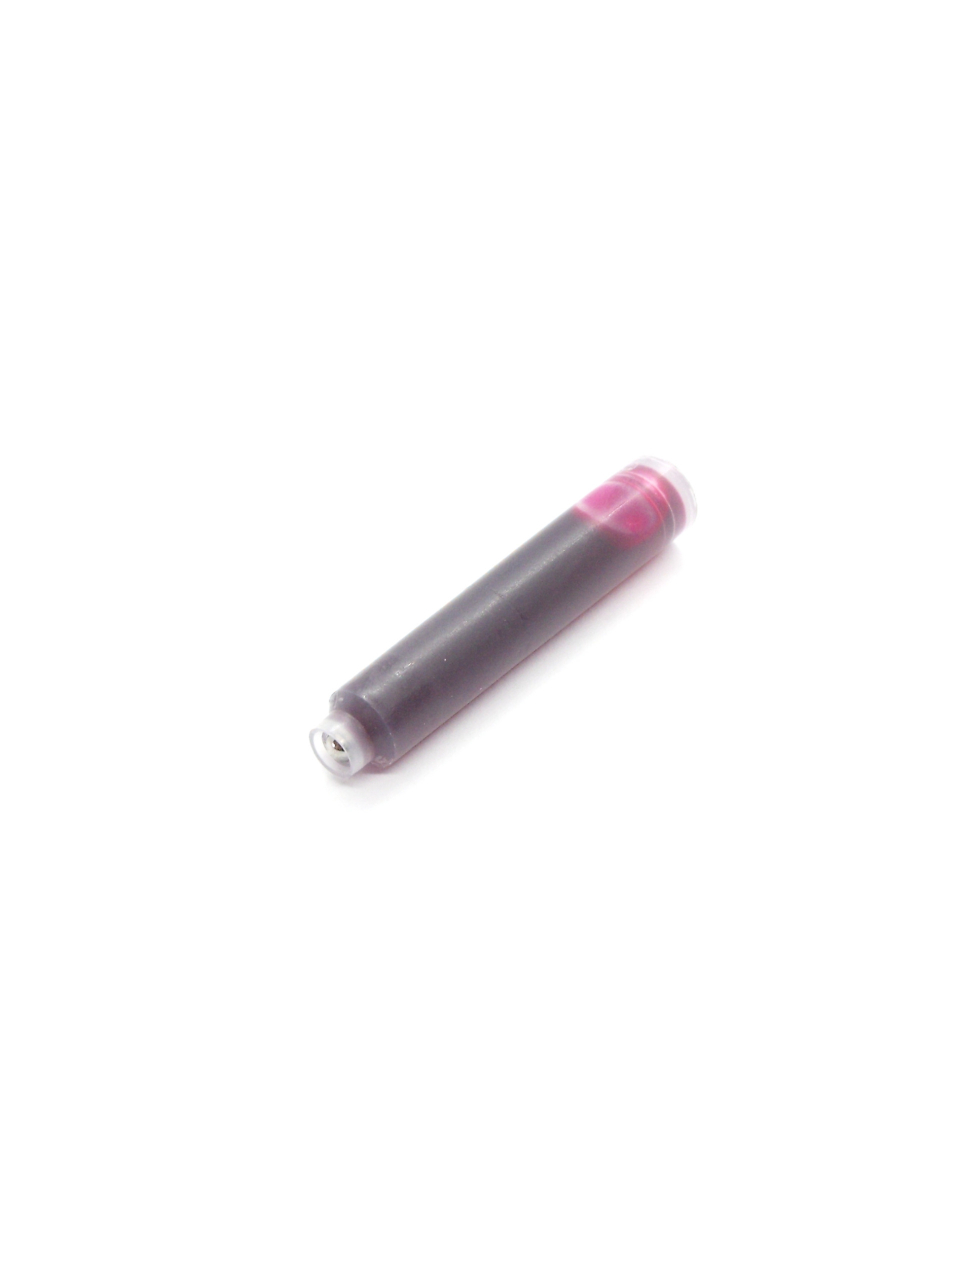 Cartridges For Colibri Fountain Pens (Pink)